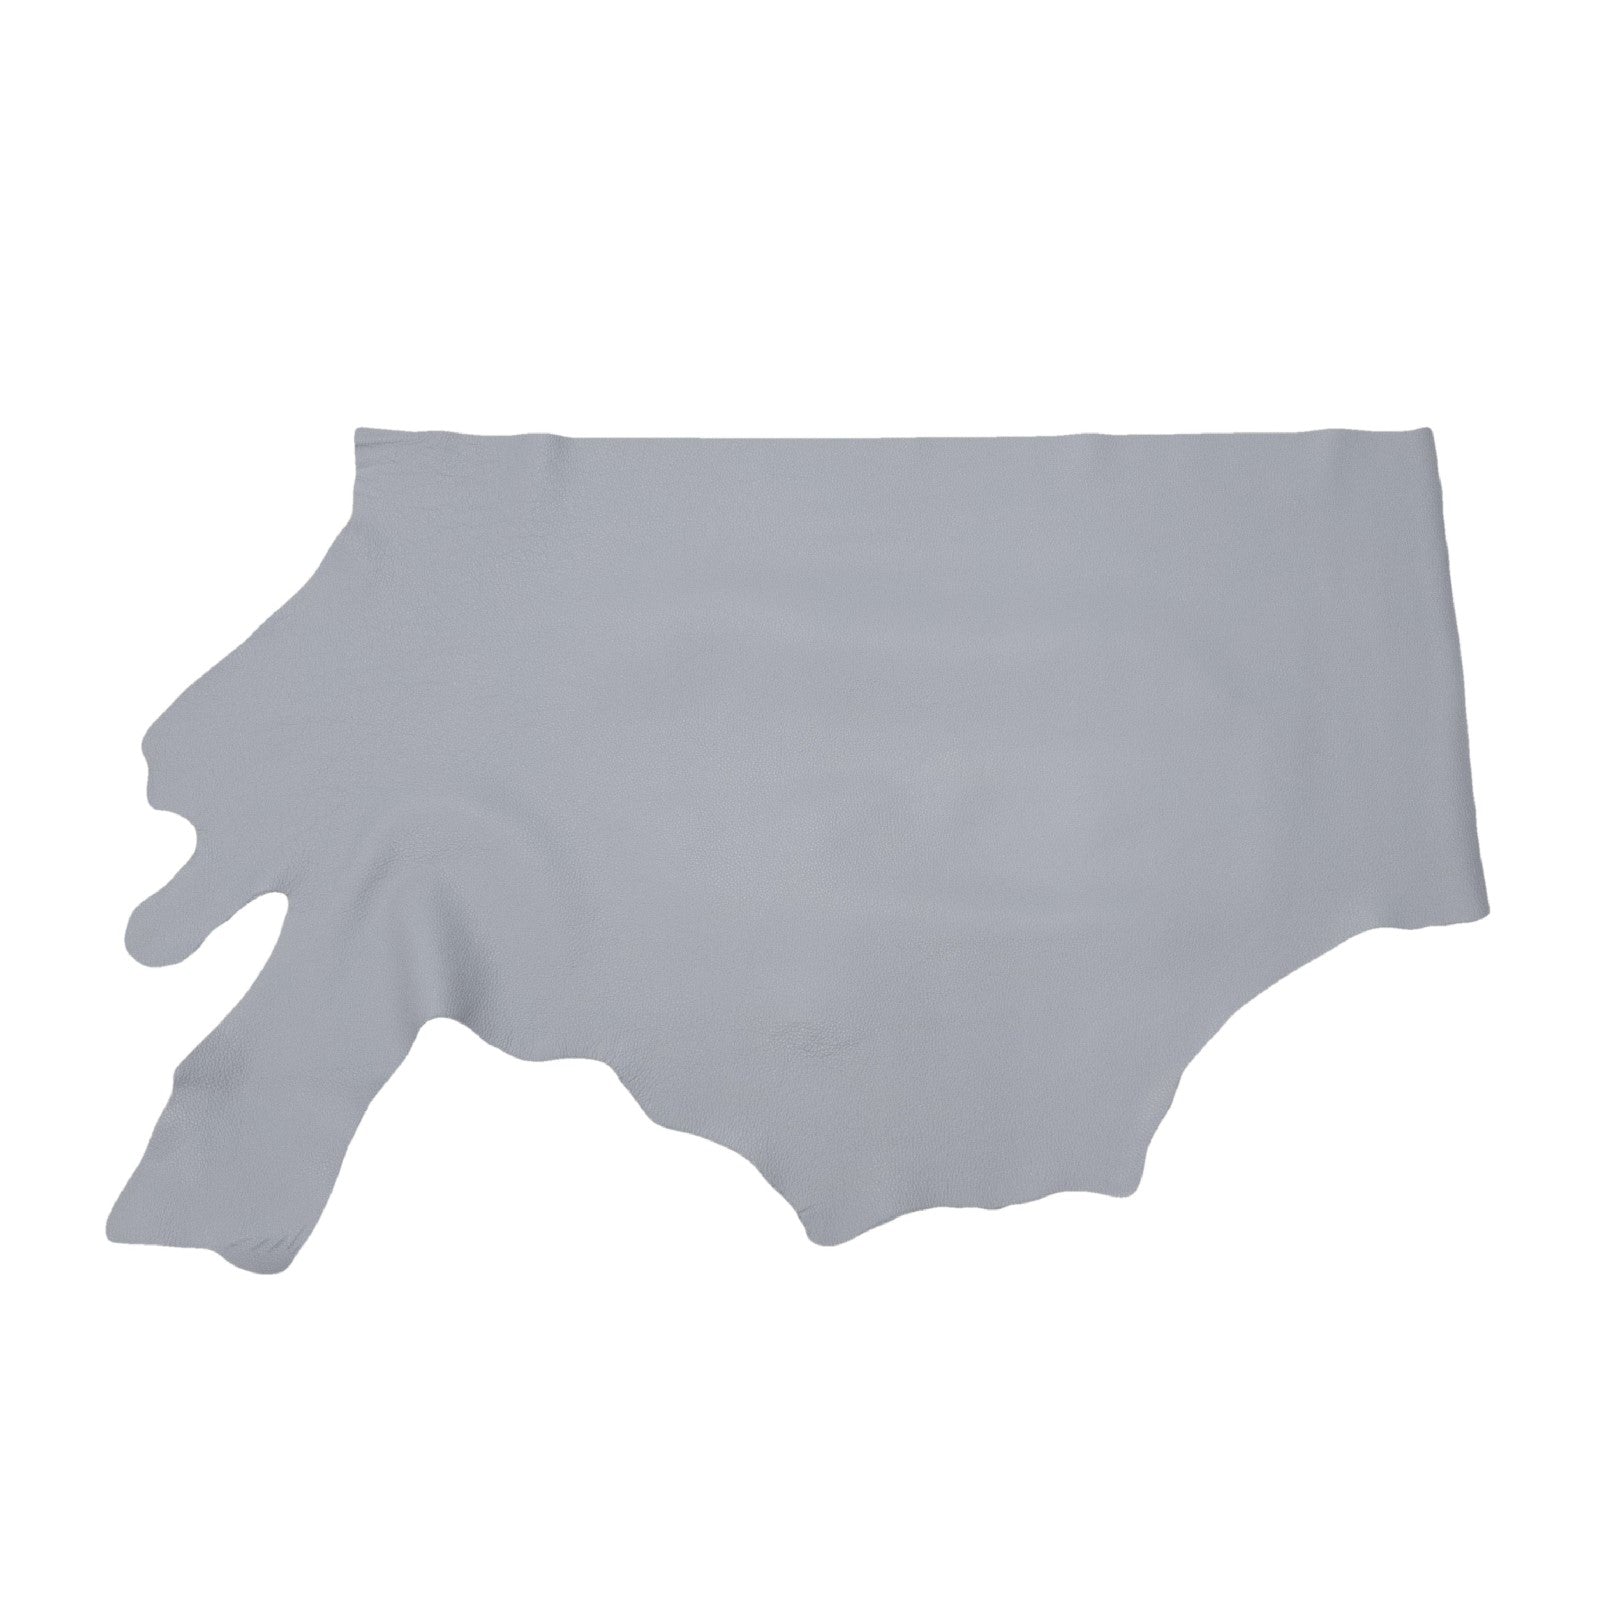 Pittsburgh Steel Gray Tried n True 3-4 oz Leather Cow Hides, Bottom Piece / 6.5-7.5 Square Foot | The Leather Guy